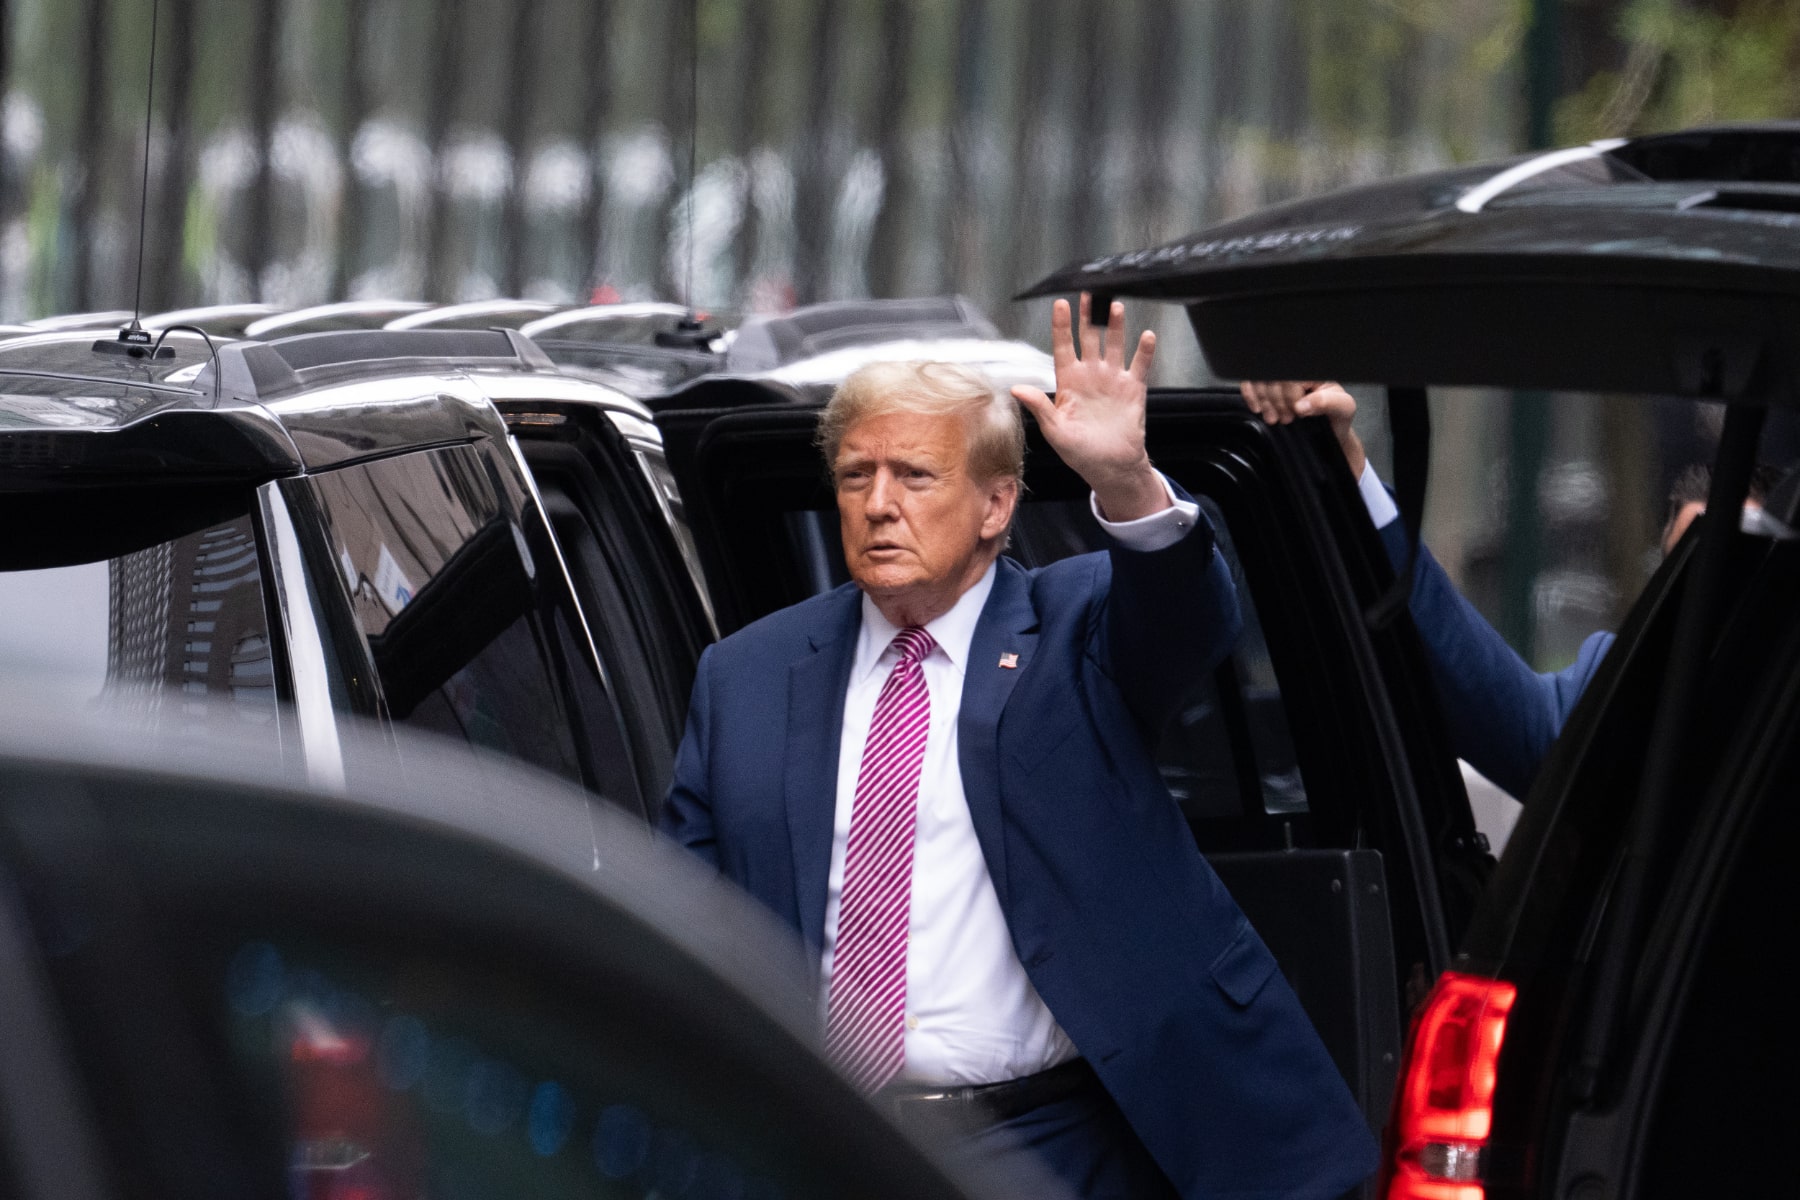 Donald Trump, standing near SUVs, waves outside Trump Tower